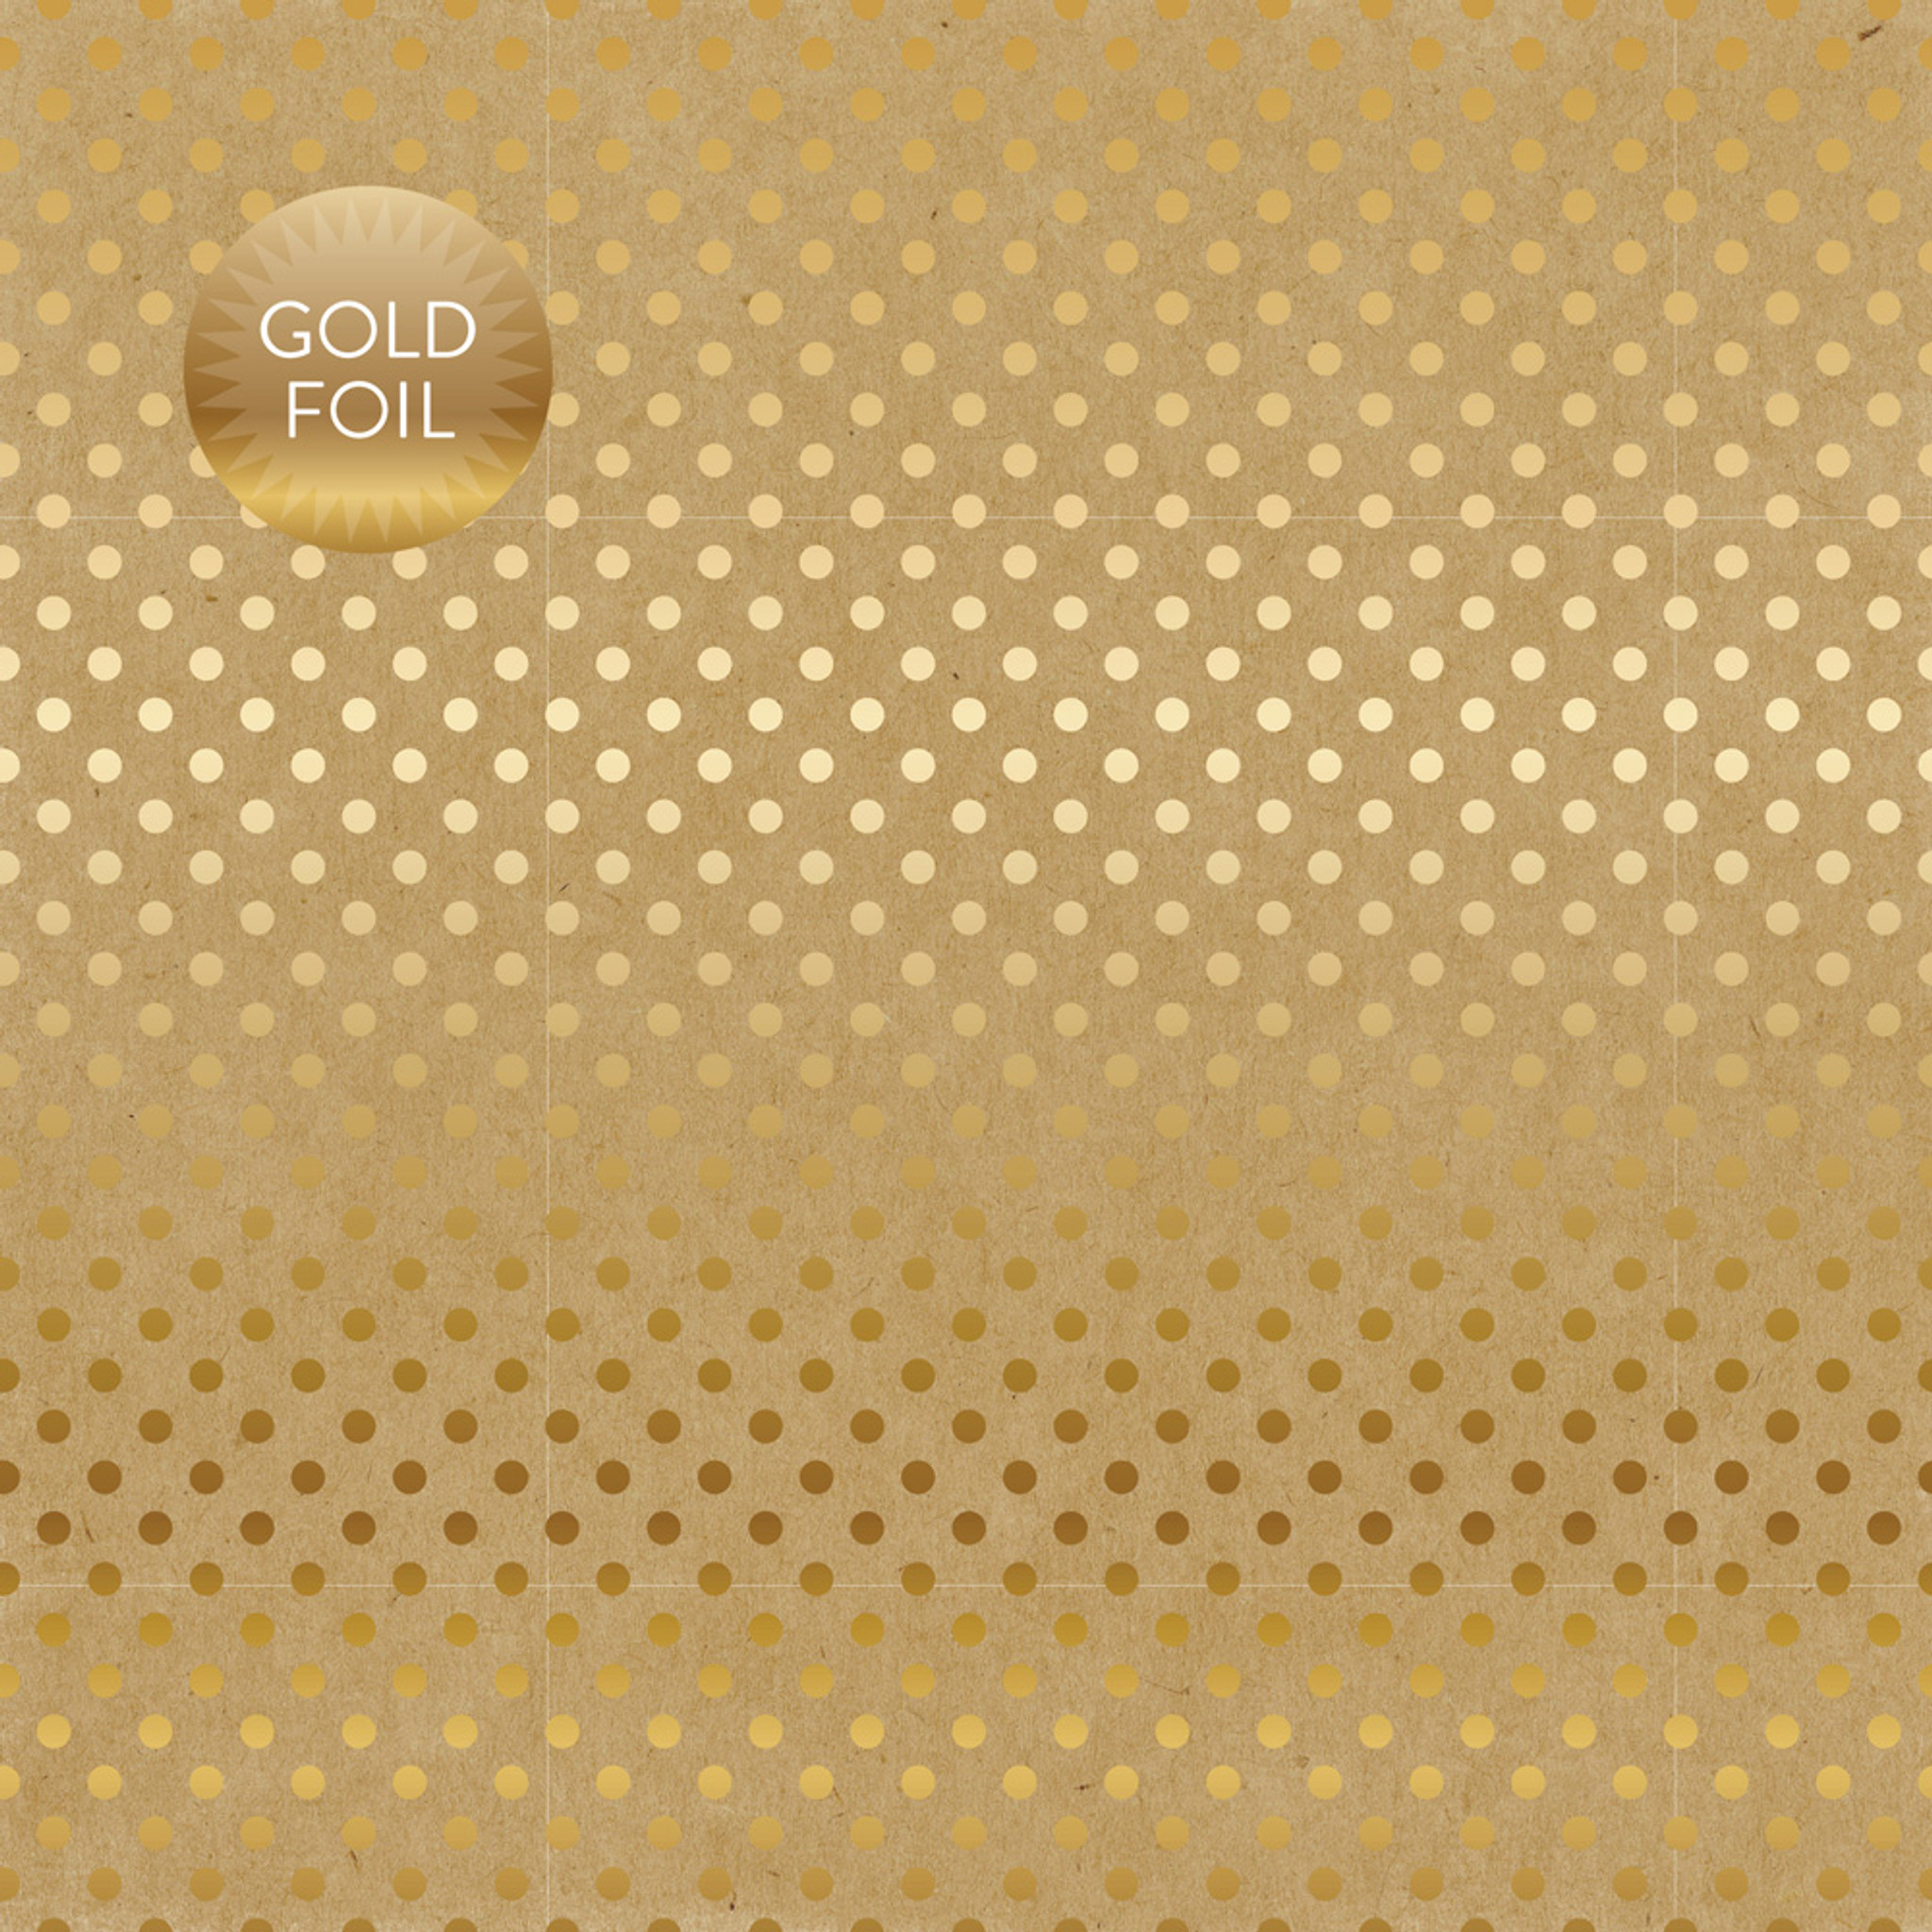 Gold Dots on Chiffon 12x12 Cardstock - Recollections